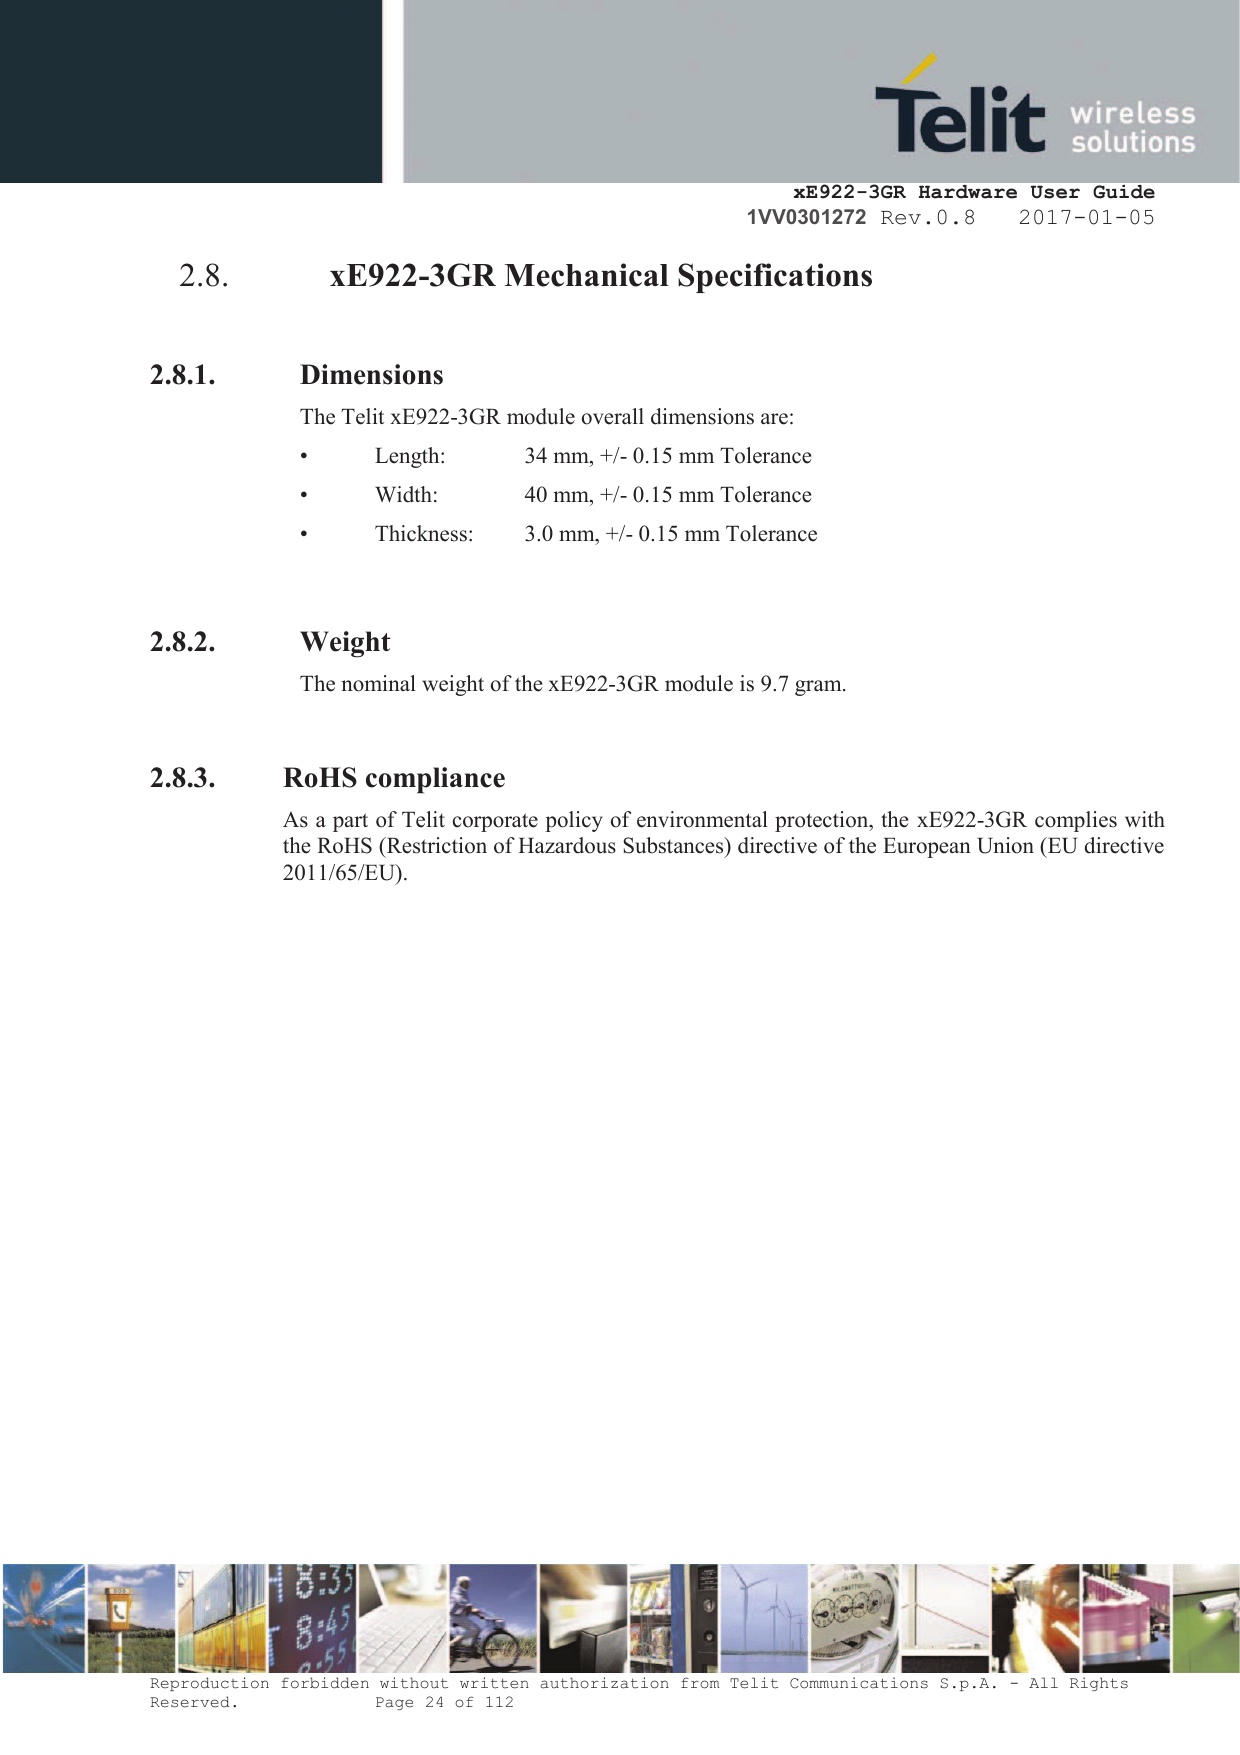     xE922-3GR Hardware User Guide 1VV0301272 Rev.0.8   2017-01-05 Reproduction forbidden without written authorization from Telit Communications S.p.A. - All Rights Reserved.    Page 24 of 112  2.8. xE922-3GR Mechanical Specifications  2.8.1. Dimensions The Telit xE922-3GR module overall dimensions are:  •  Length:   34 mm, +/- 0.15 mm Tolerance •  Width:    40 mm, +/- 0.15 mm Tolerance •  Thickness:   3.0 mm, +/- 0.15 mm Tolerance   2.8.2. Weight The nominal weight of the xE922-3GR module is 9.7 gram.  2.8.3. RoHS compliance As a part of Telit corporate policy of environmental protection, the xE922-3GR complies with the RoHS (Restriction of Hazardous Substances) directive of the European Union (EU directive 2011/65/EU). 